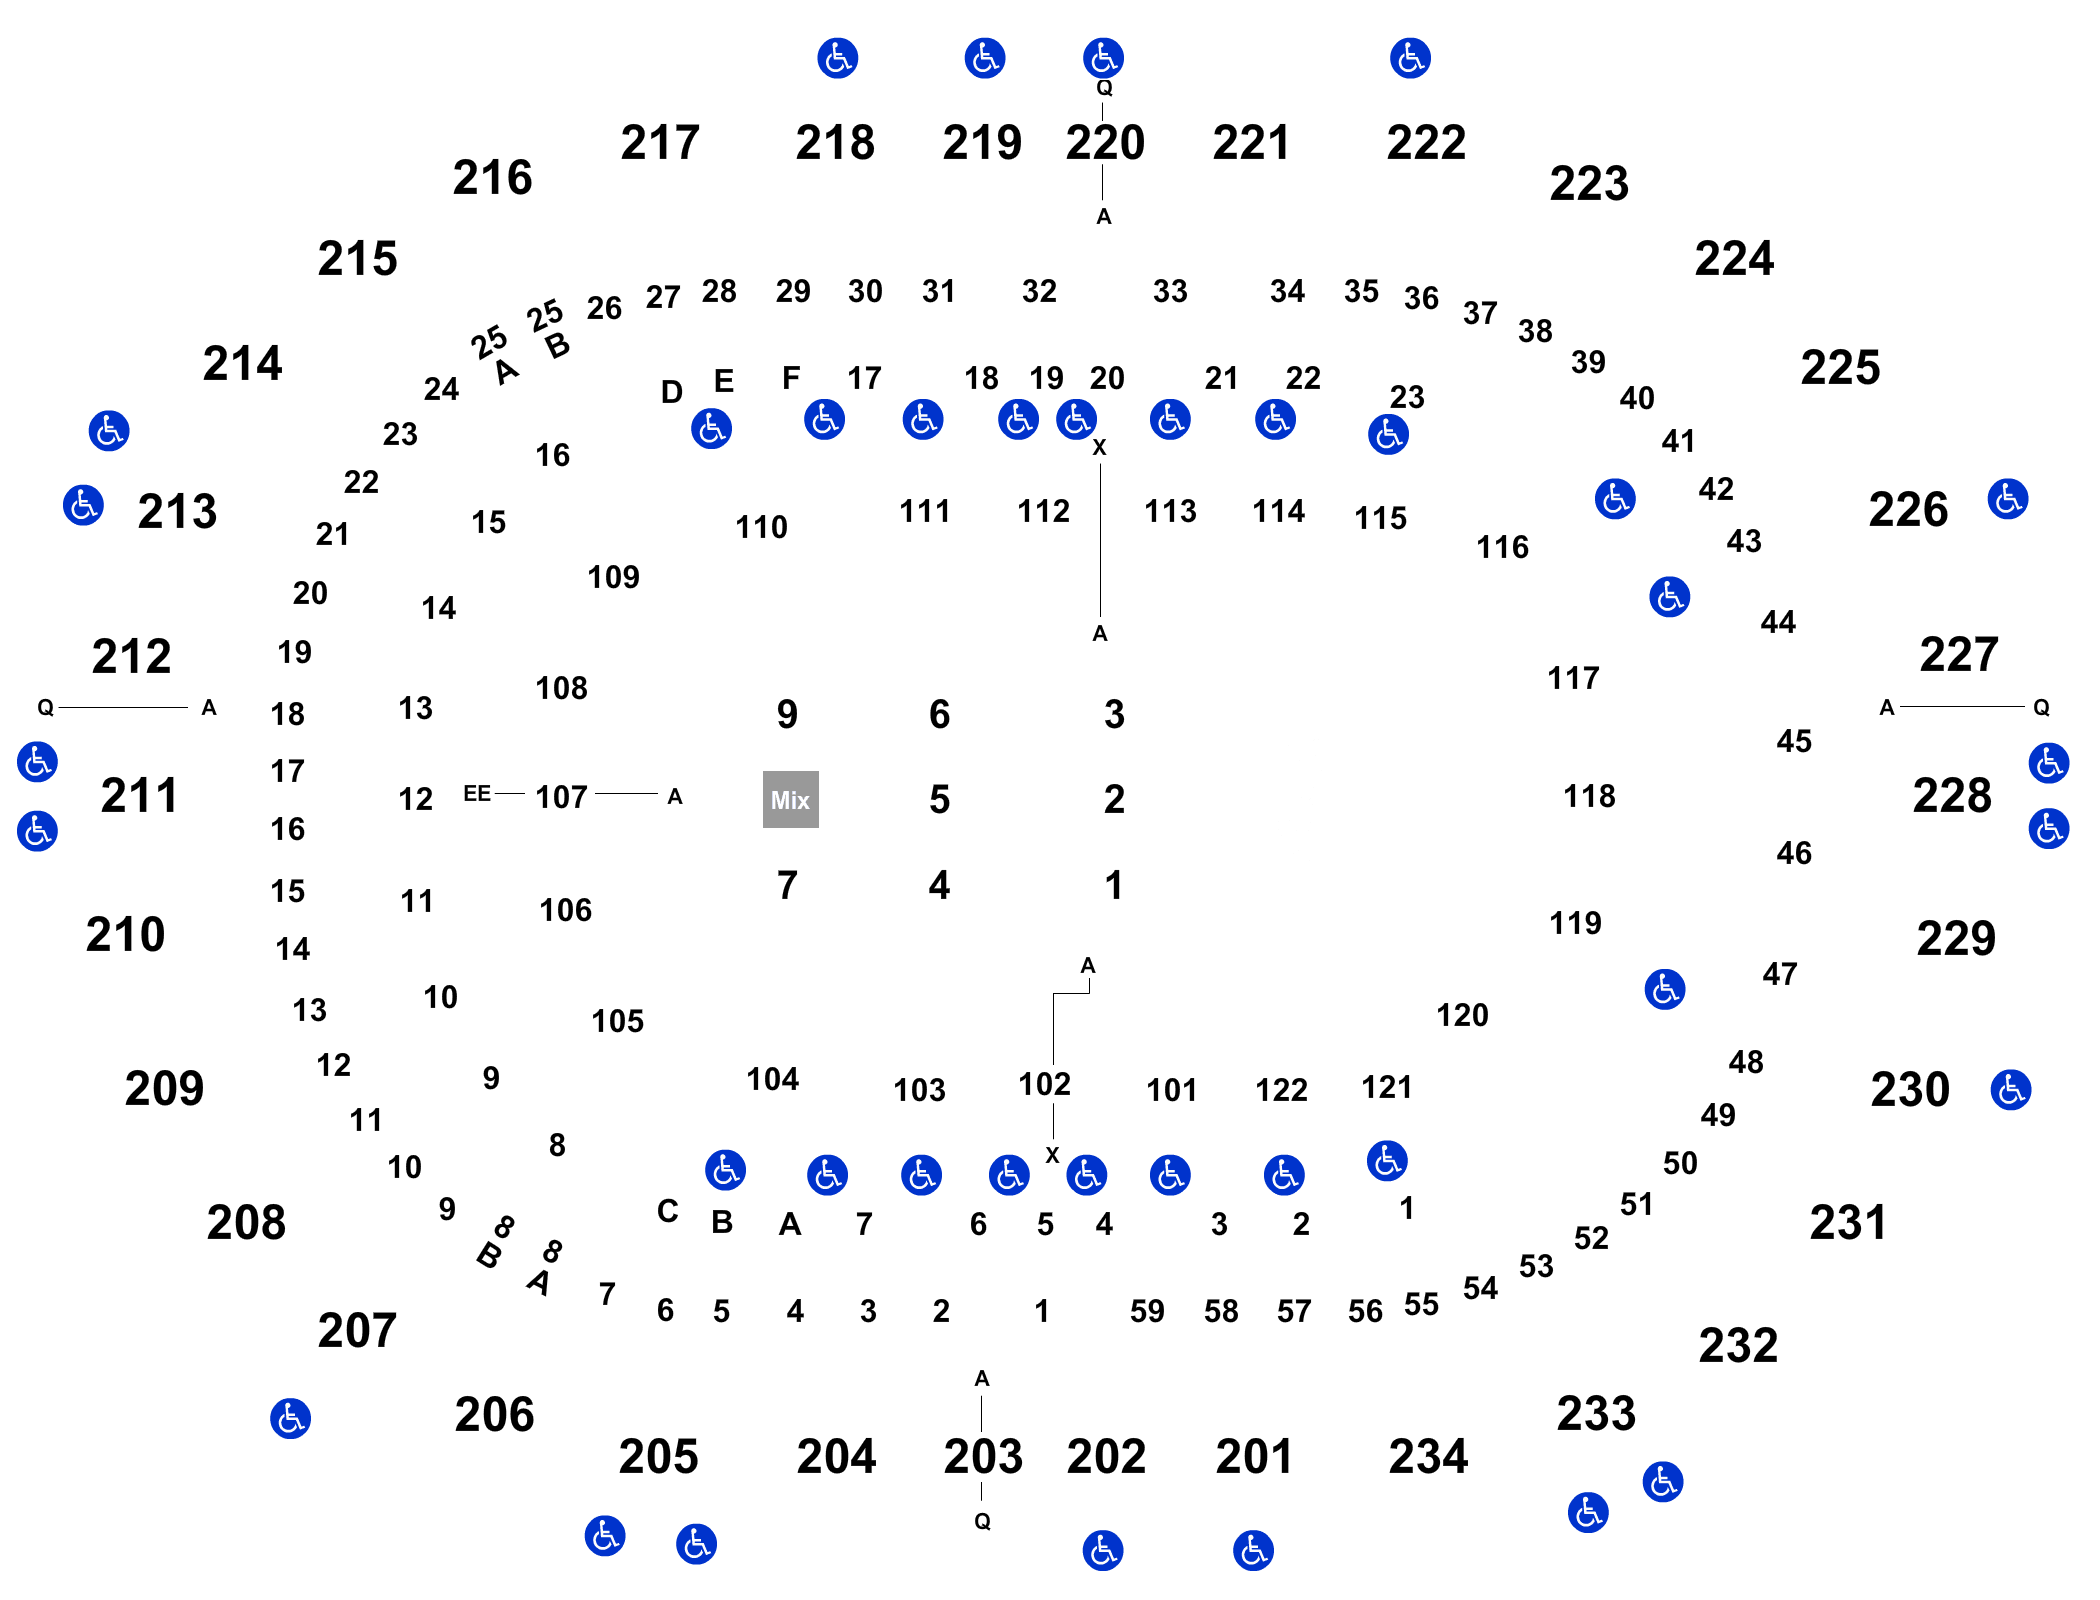 PPG Paints Arena Seating Chart + Rows, Seat Numbers and Club Seats